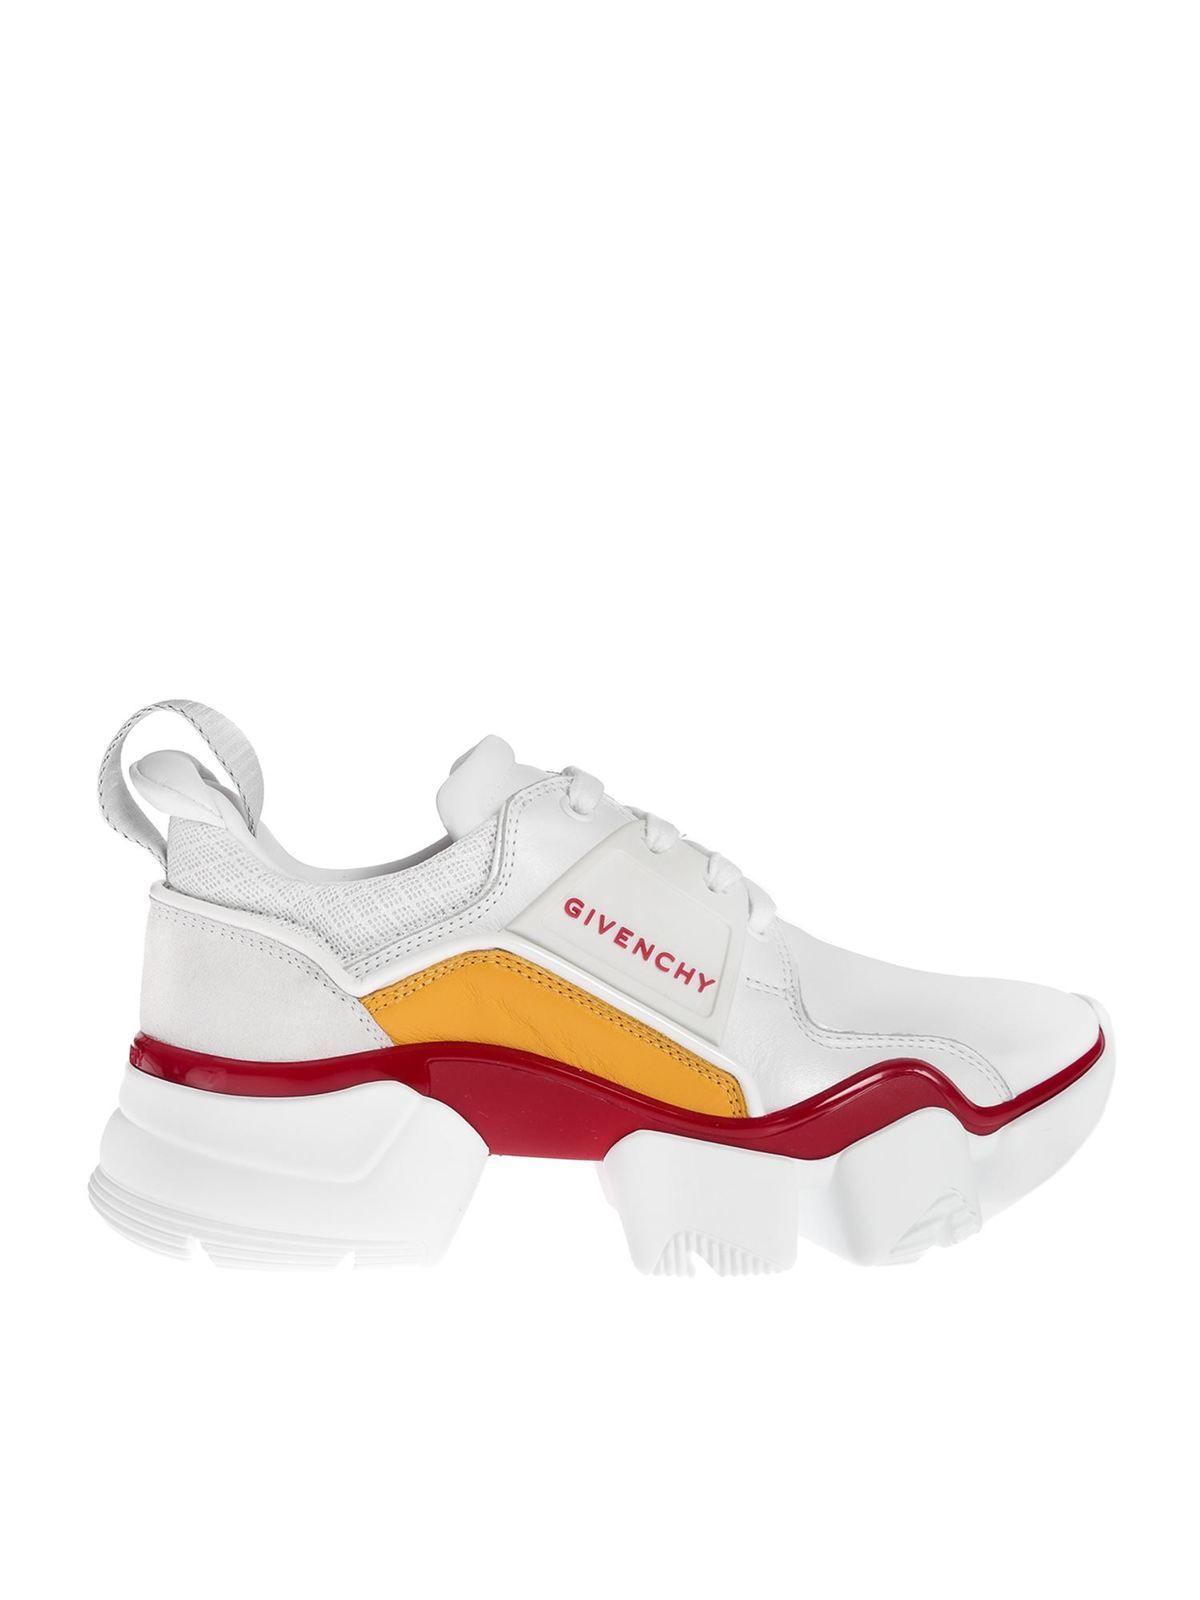 GIVENCHY JAW SNEAKERS IN WHITE AND RED